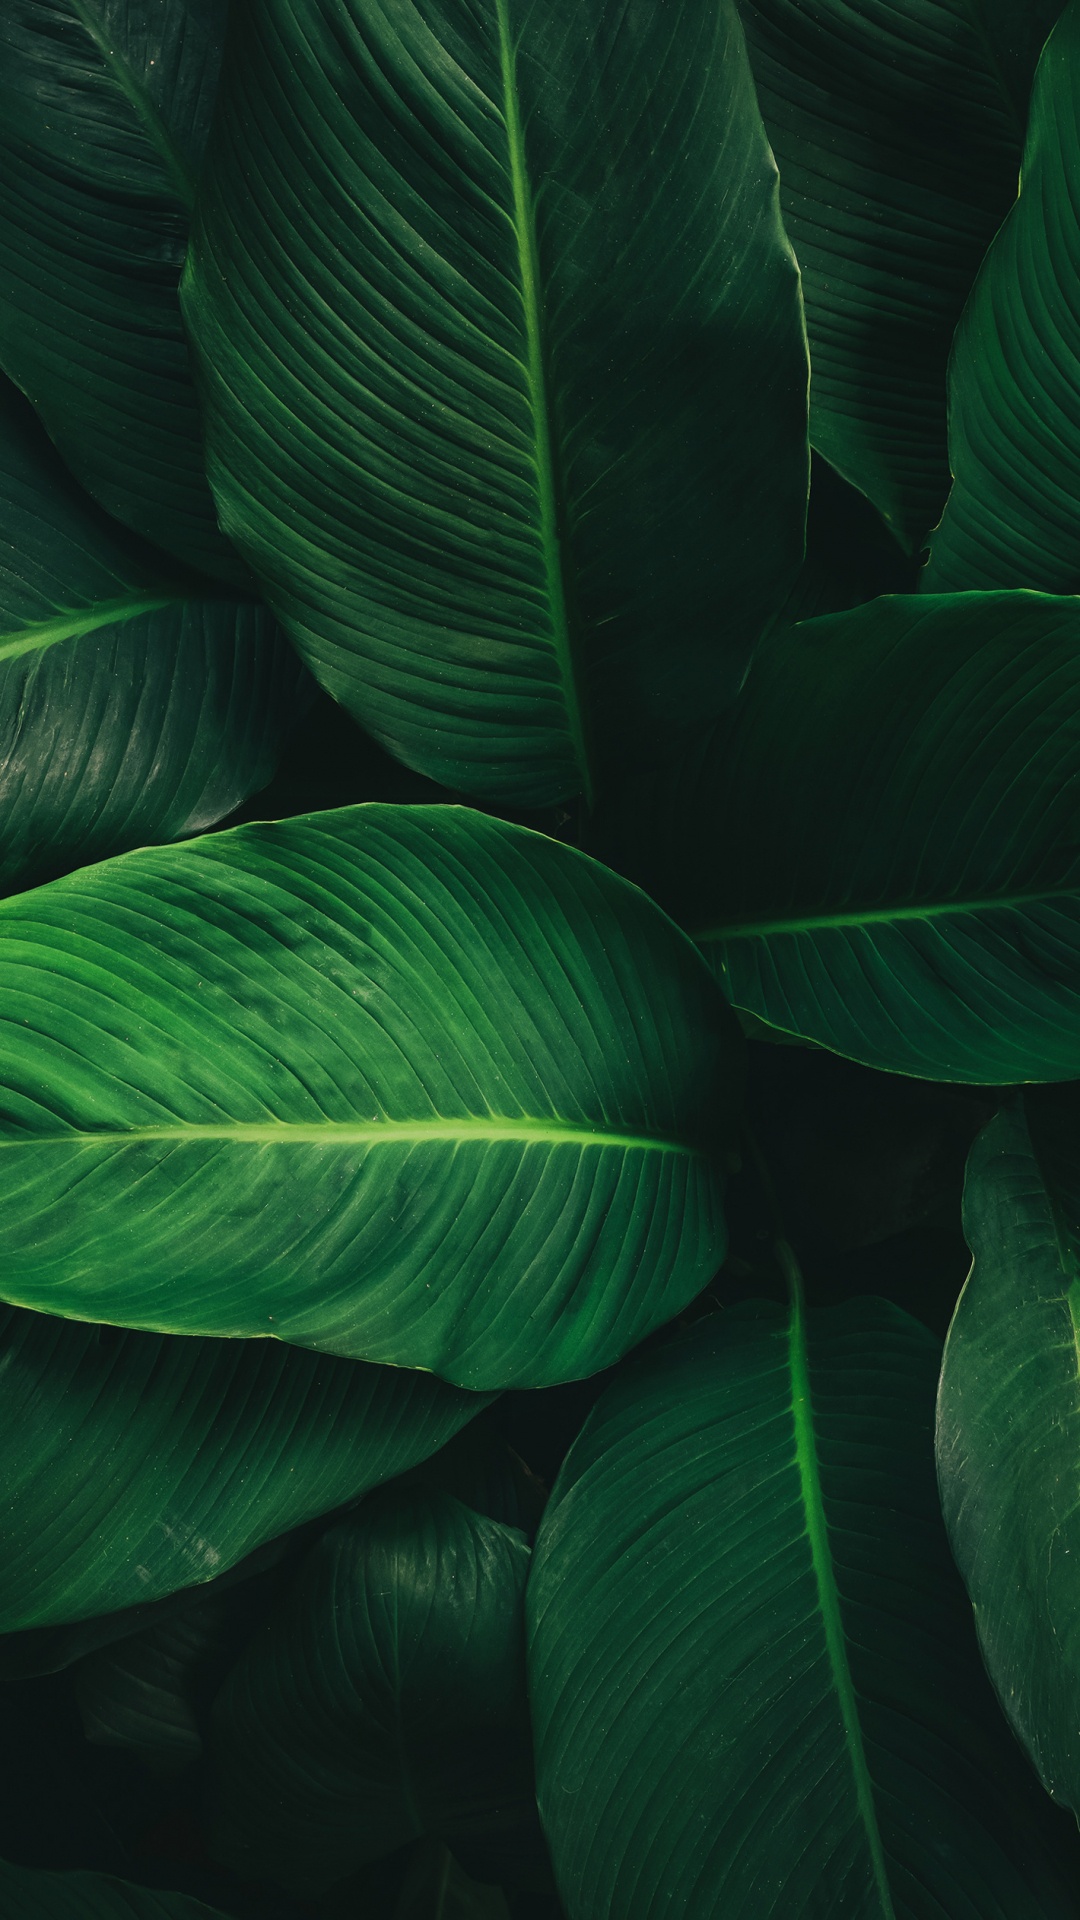 10 Tropical Jungle iPhone X Wallpapers  Preppy Wallpapers  Leaves  wallpaper iphone Forest wallpaper iphone Iphone wallpaper tropical